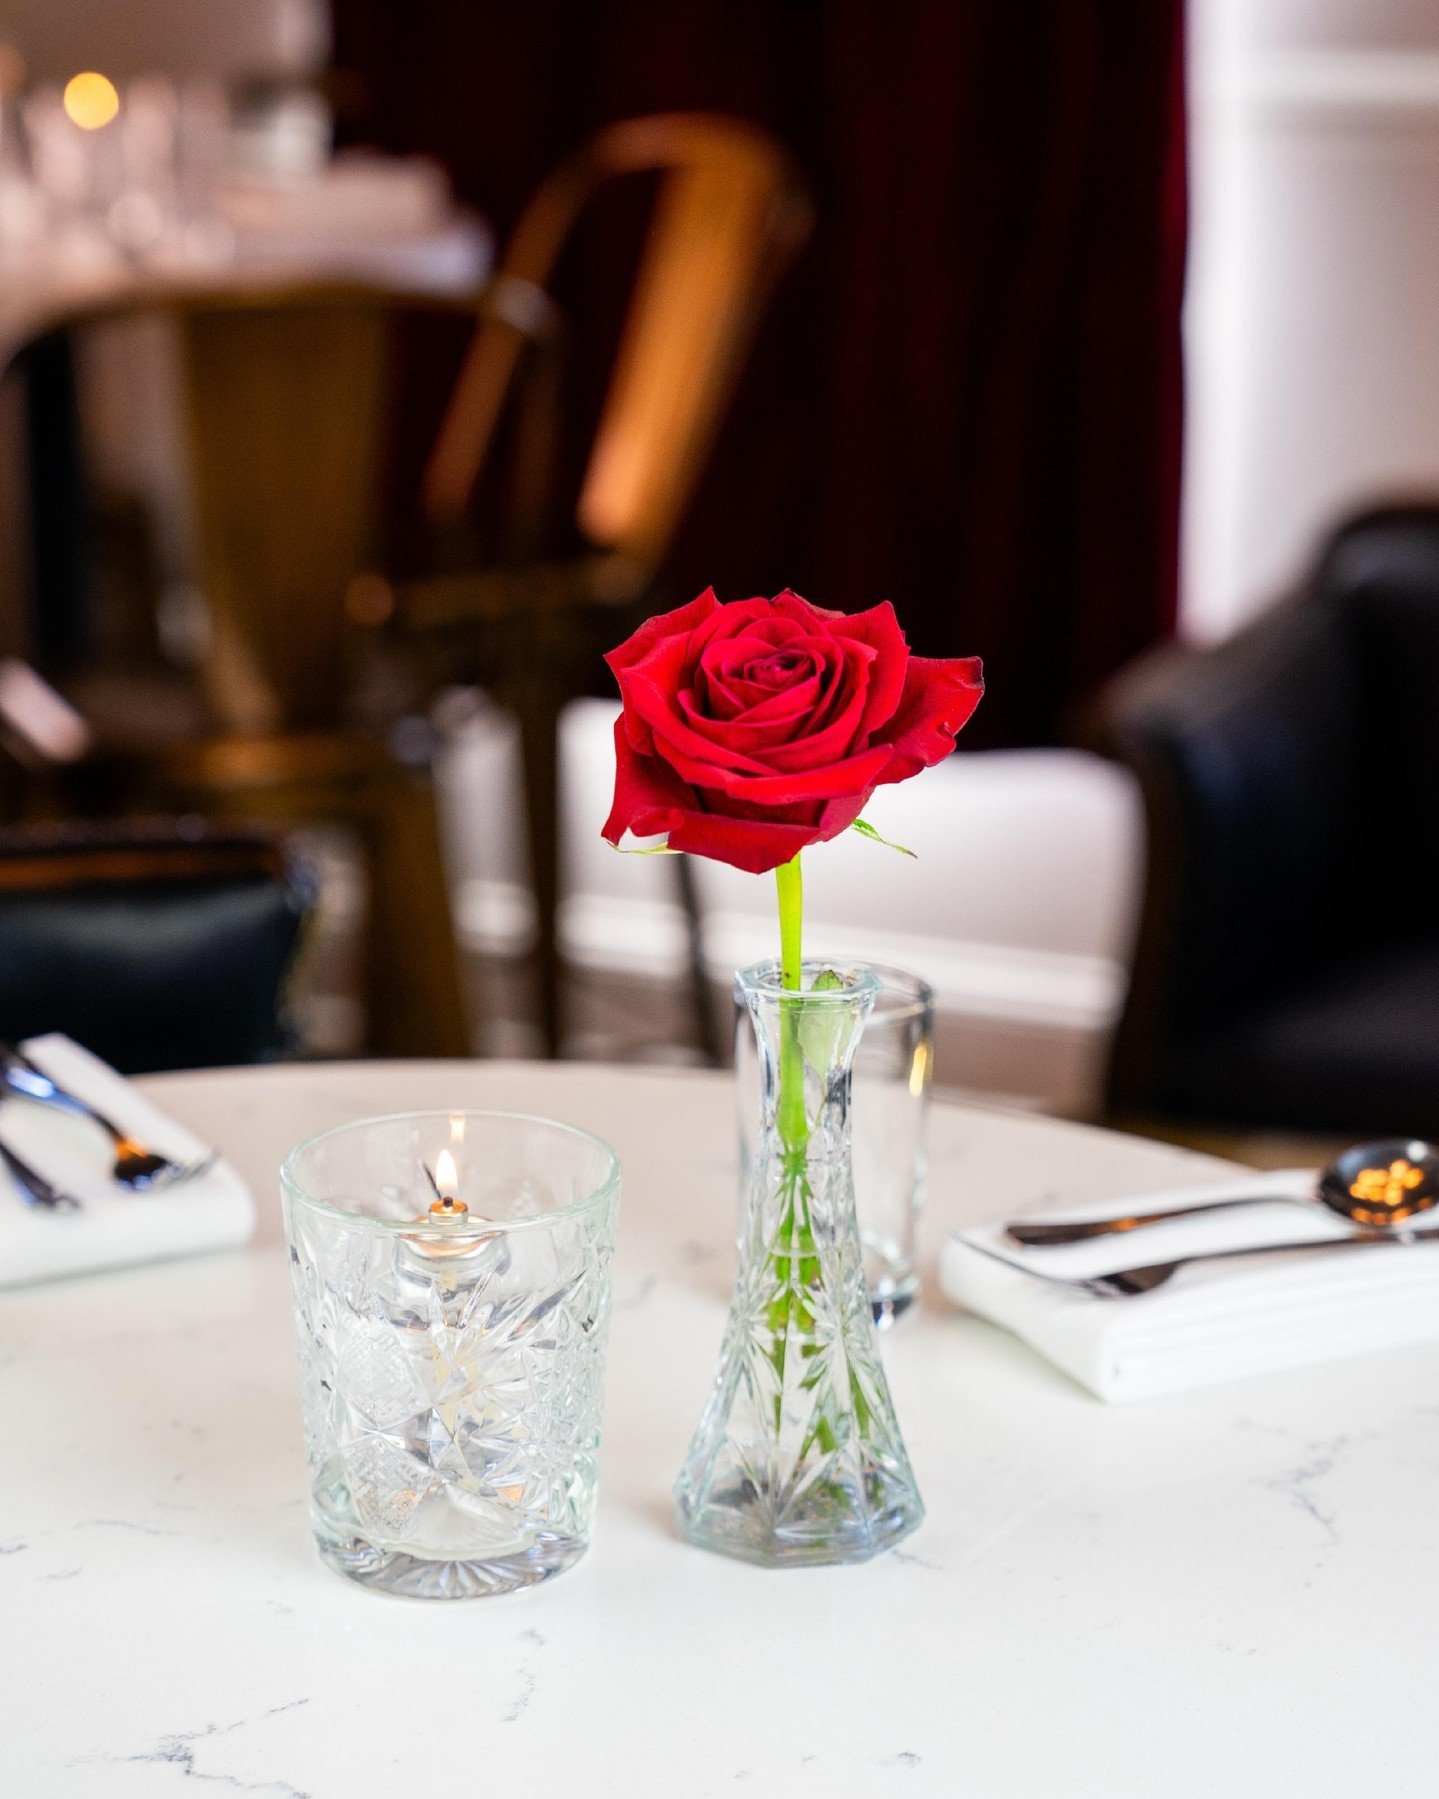 Saving you a seat... and a chocolate martini tonight🌹

Open from 5pm-10pm 
#stl #supportlocal #chocolatemartini